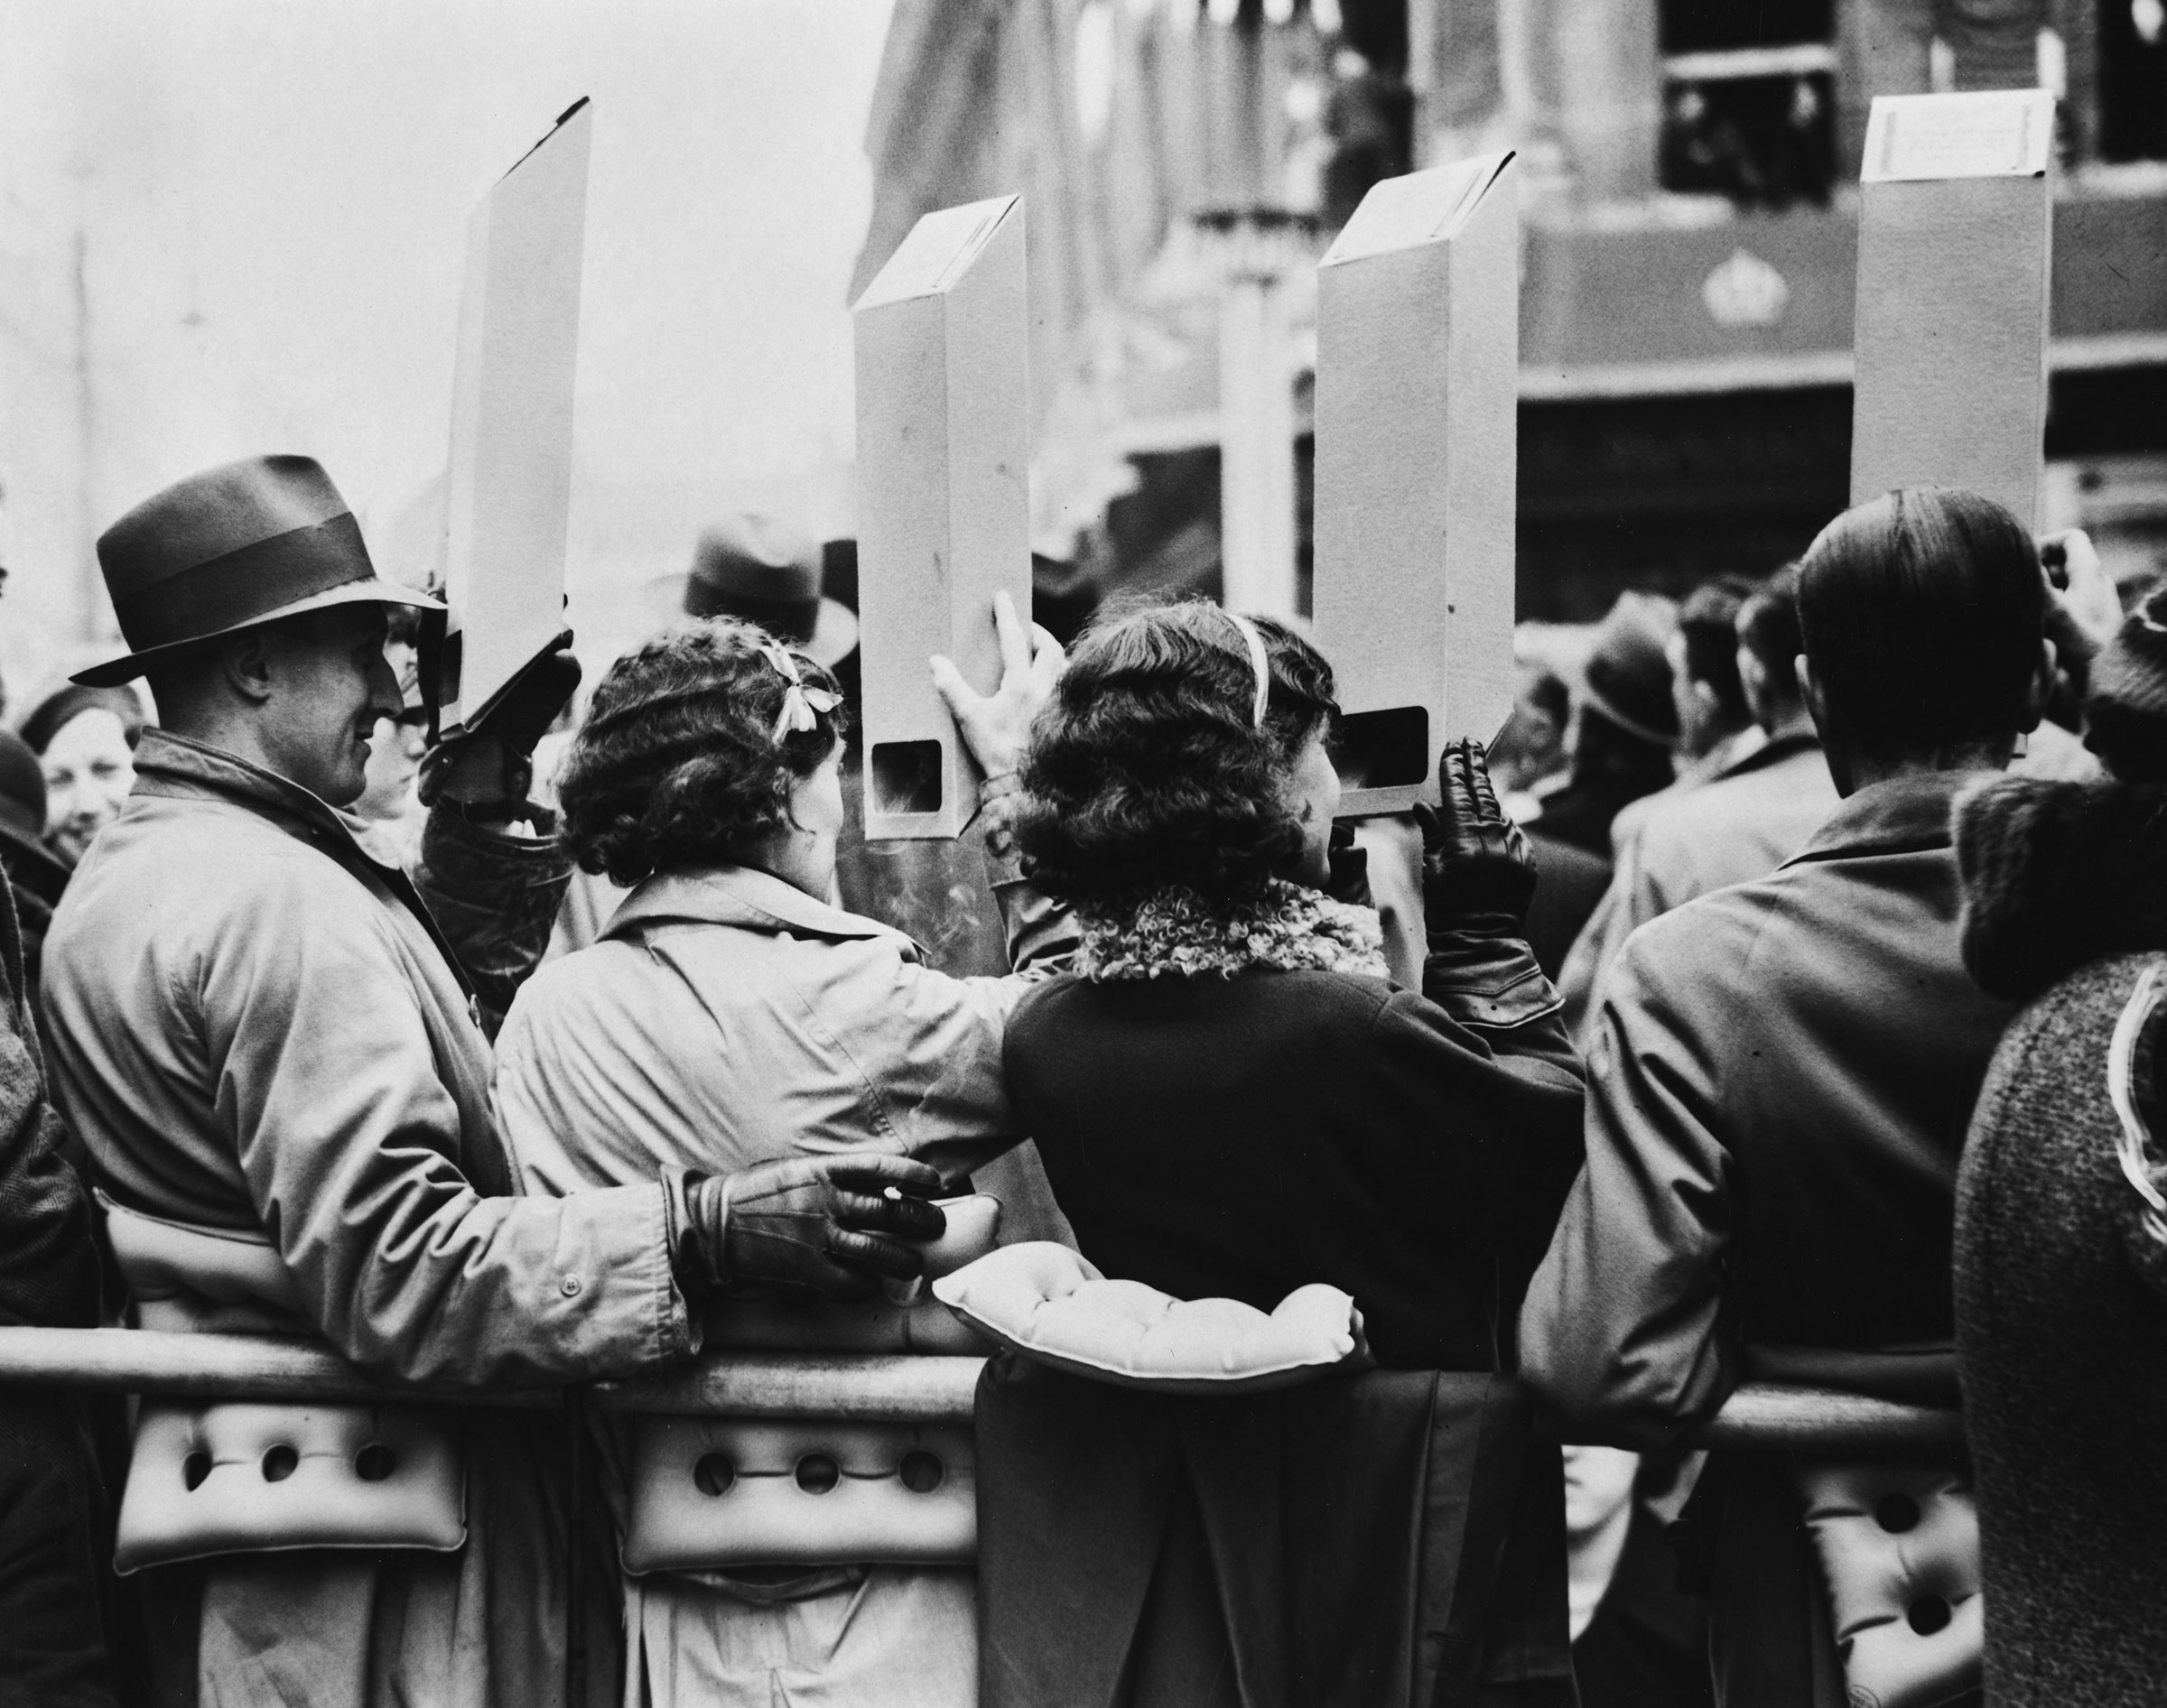 People in the crowd use cardboard periscopes to catch a glimpse of the Gold State Coach en route to the coronation ceremony on May 12, 1937. (Becker/Fox Photos/Hulton Archive/Getty Images)